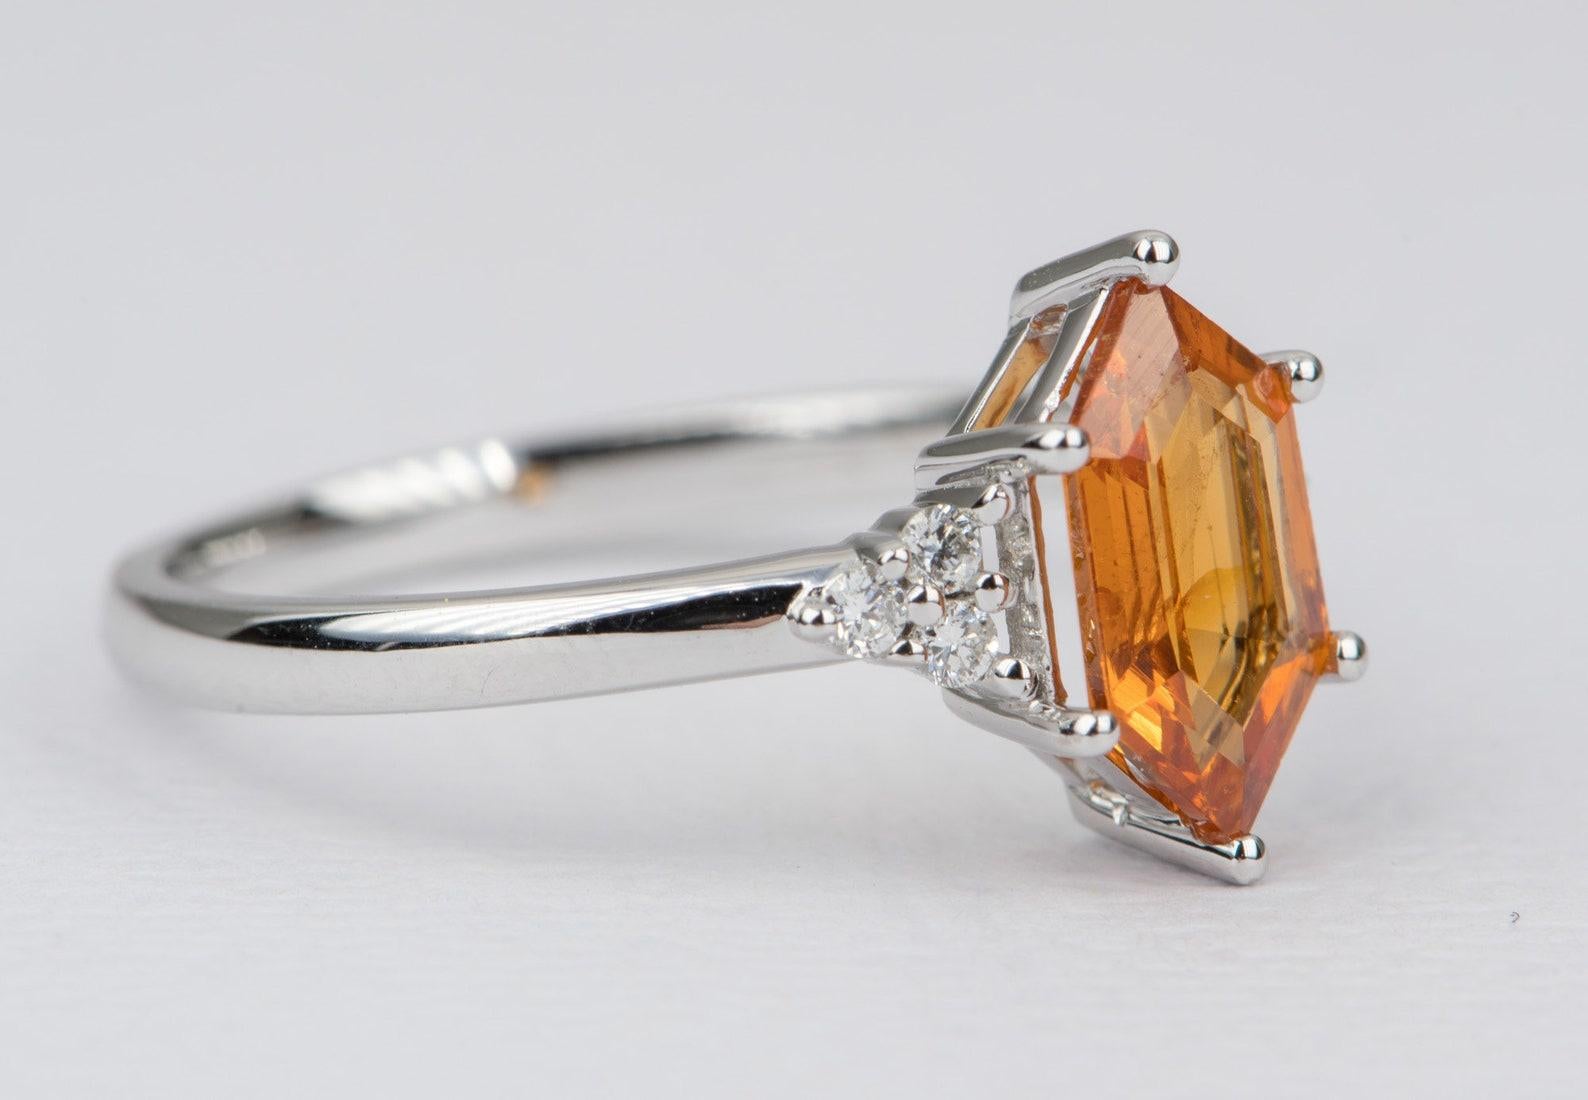 ♥  This is a beautiful 14K gold ring set with a hexagon-shaped mandarin garnet in the center, flanked by brilliant clear diamonds on each side
♥  The overall setting measures 12.0mm in width, 11.0mm in length, and sits 4.4mm tall from the finger

♥ 